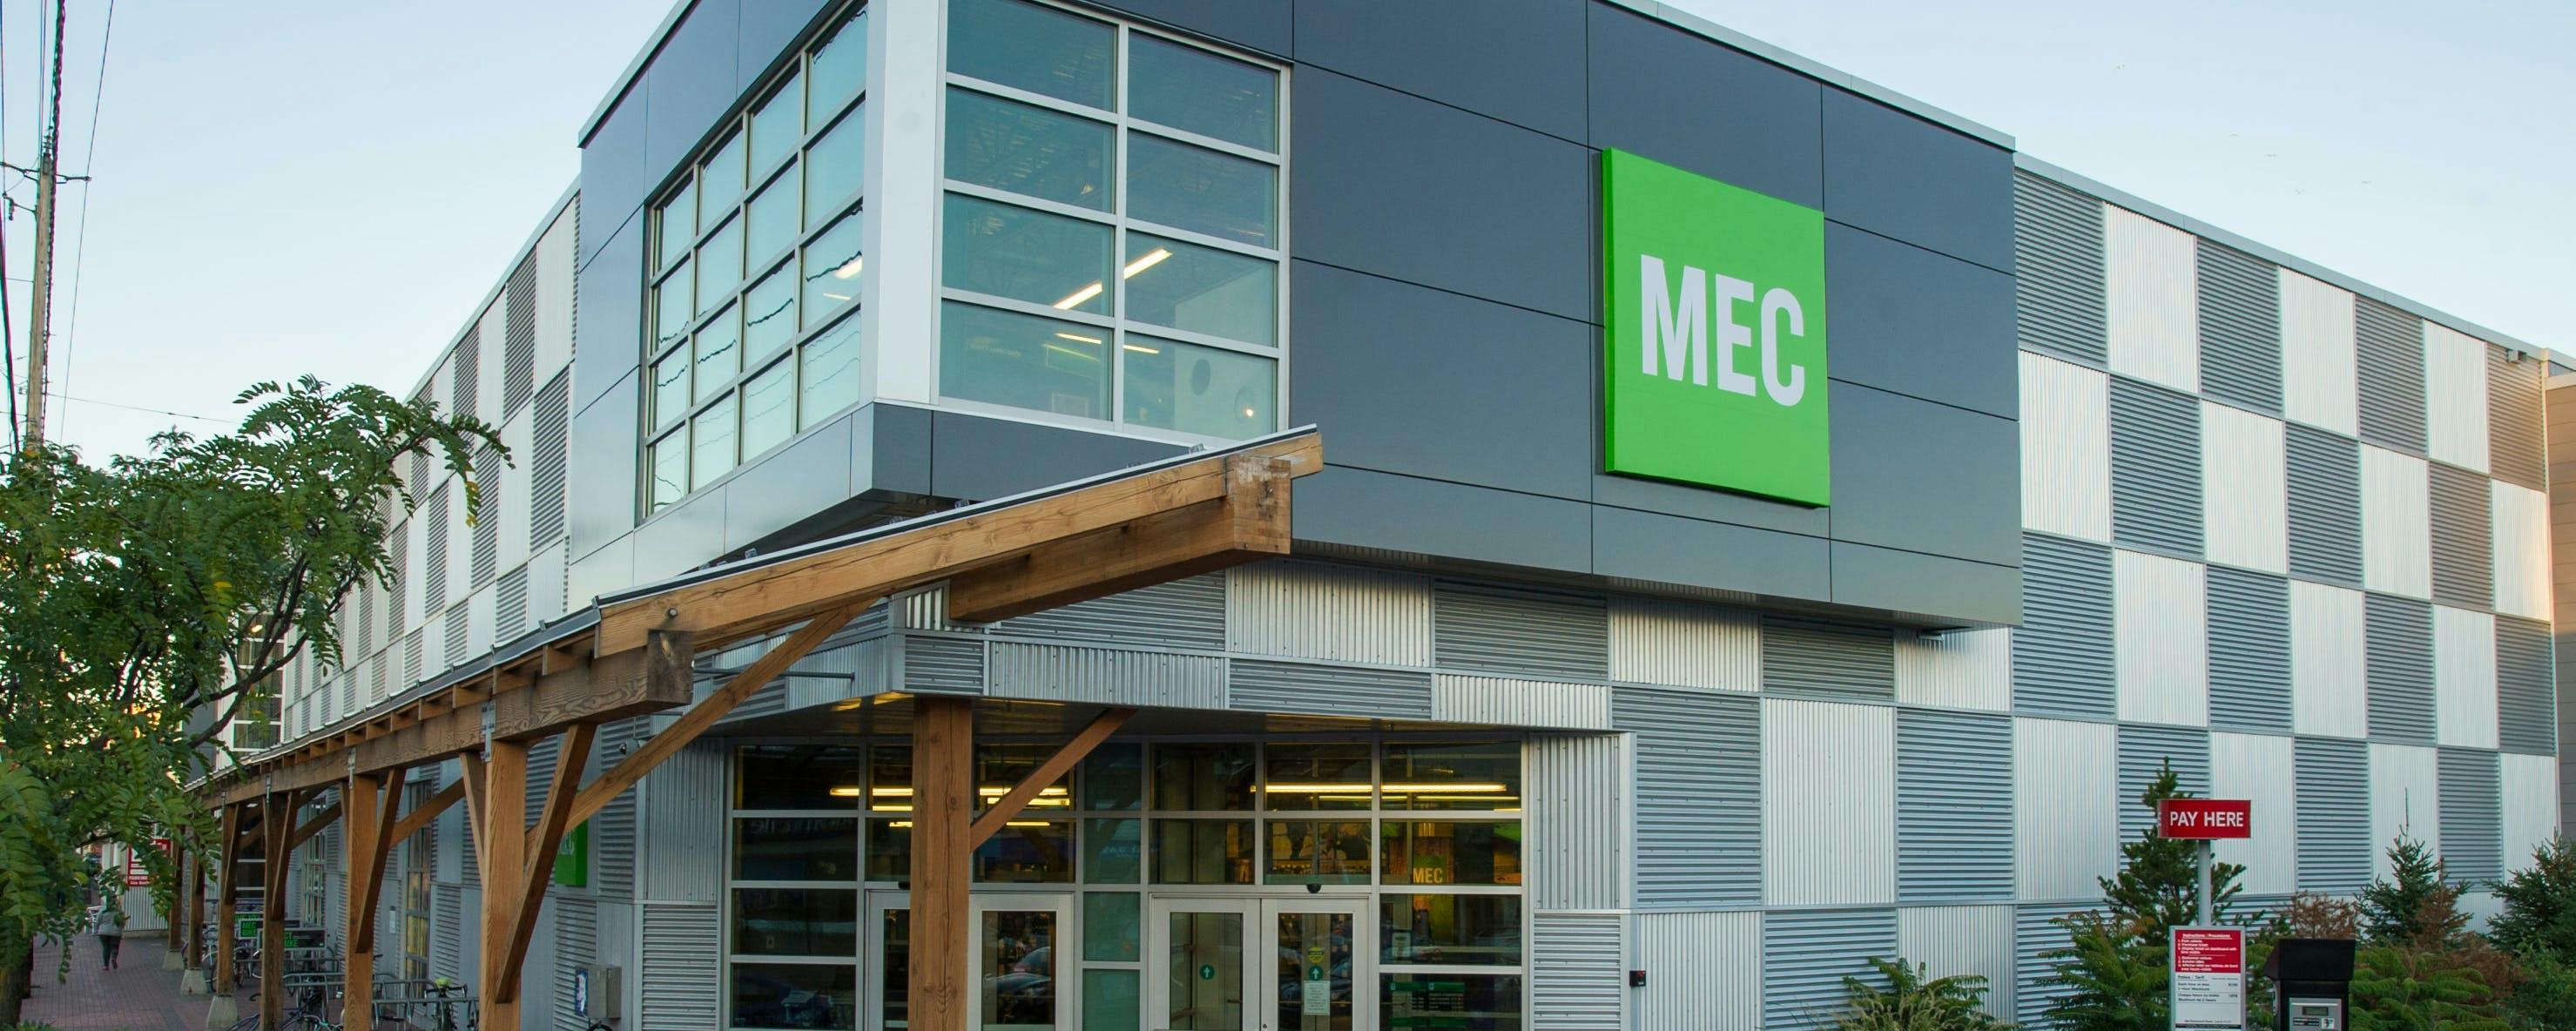 If you love trails, snow, water or fresh air, this is your store. Visit MEC Ottawa for outdoor gear, know-how and inspiration.